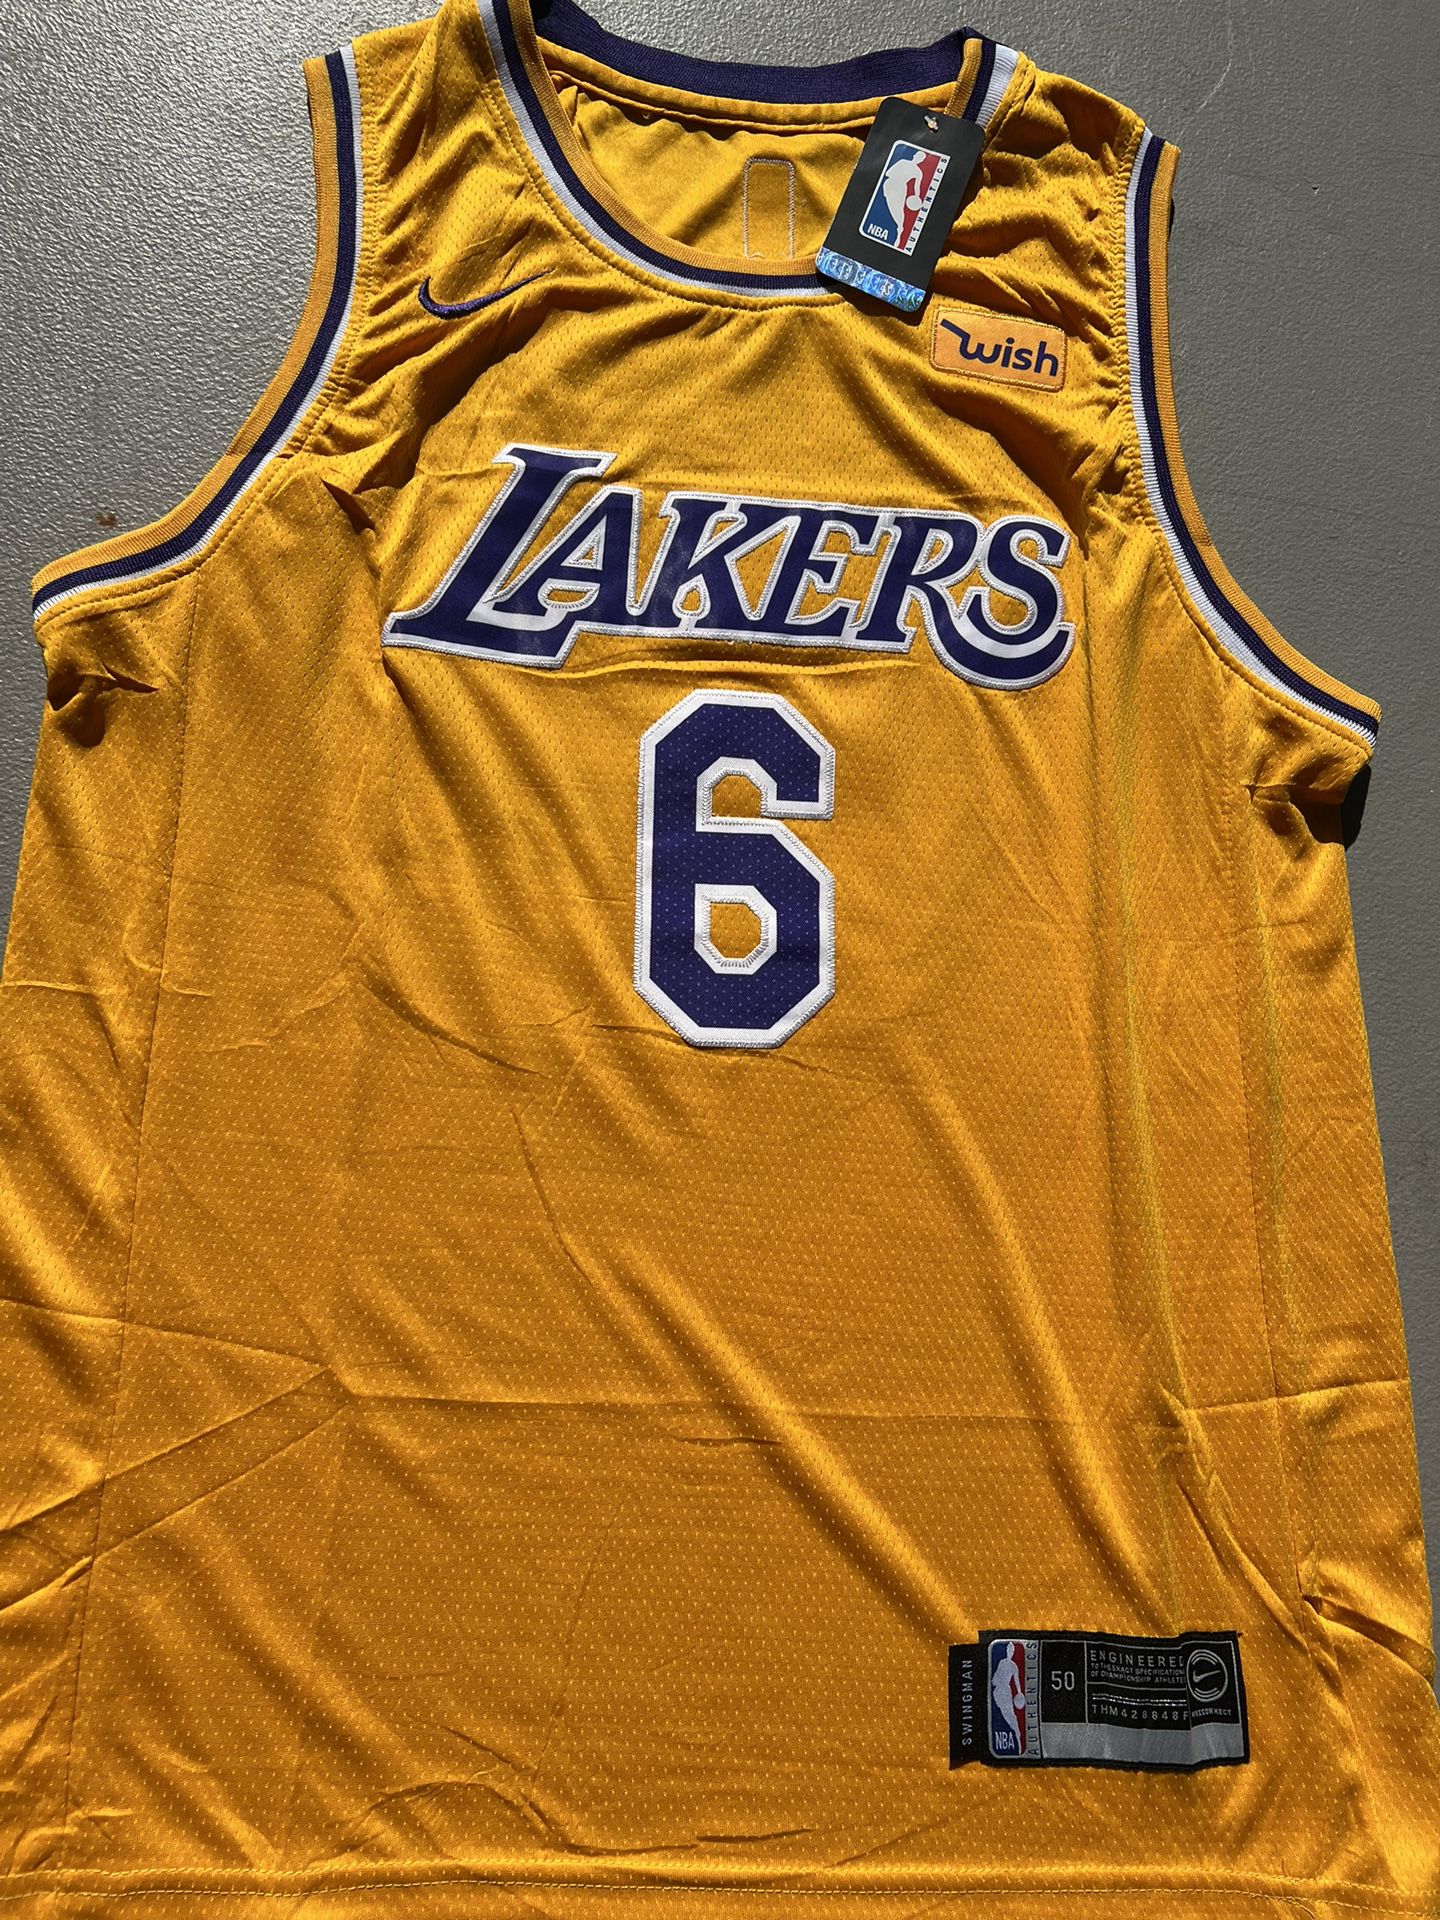 🤴 Lebron James Los Angeles Lakers Home Jersey